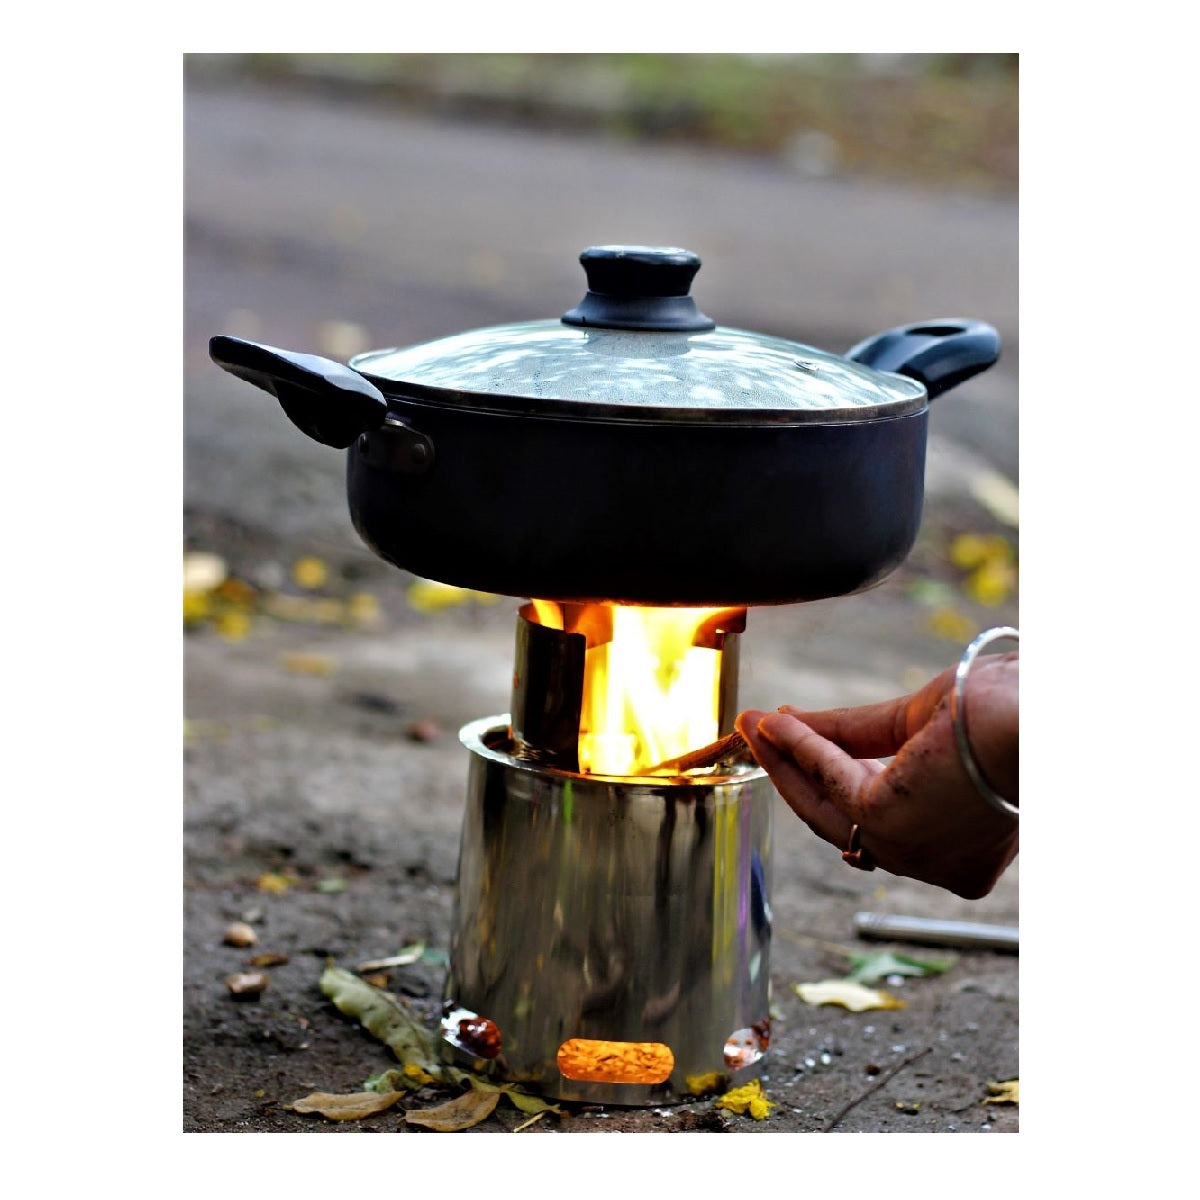 G-Spark Camping Stove - Outdoor Travel Gear 2